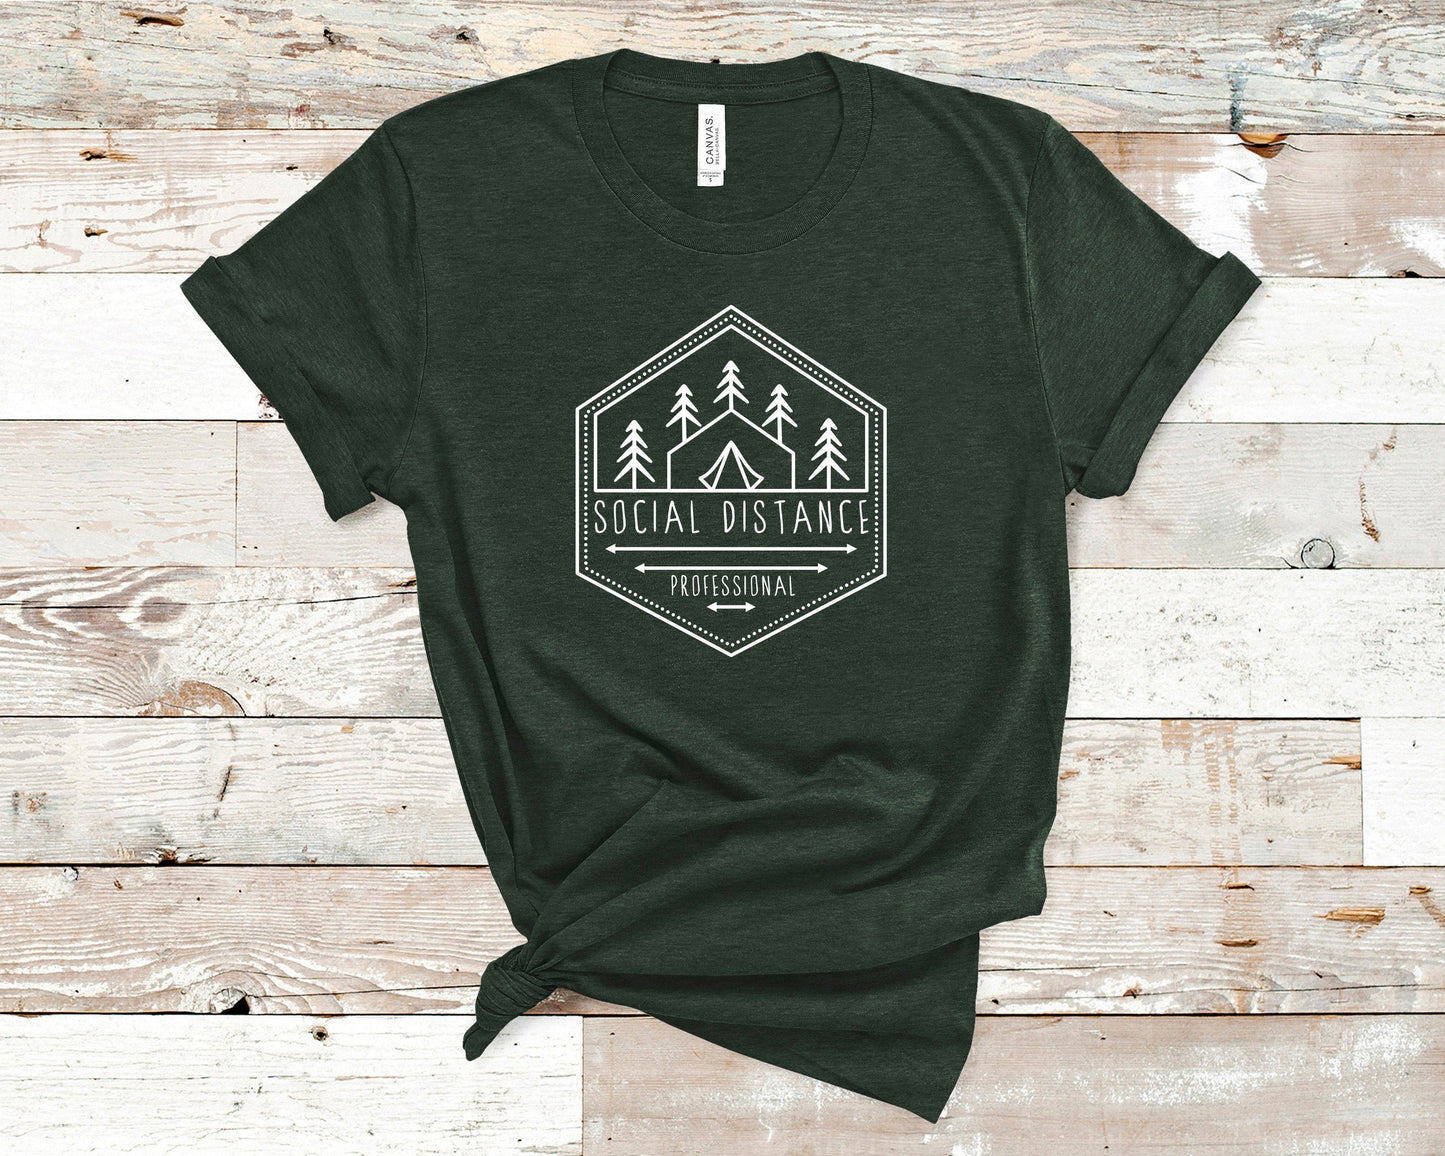 Retro Camp or Hiking/Mountain Shirt - Social Distance Professional